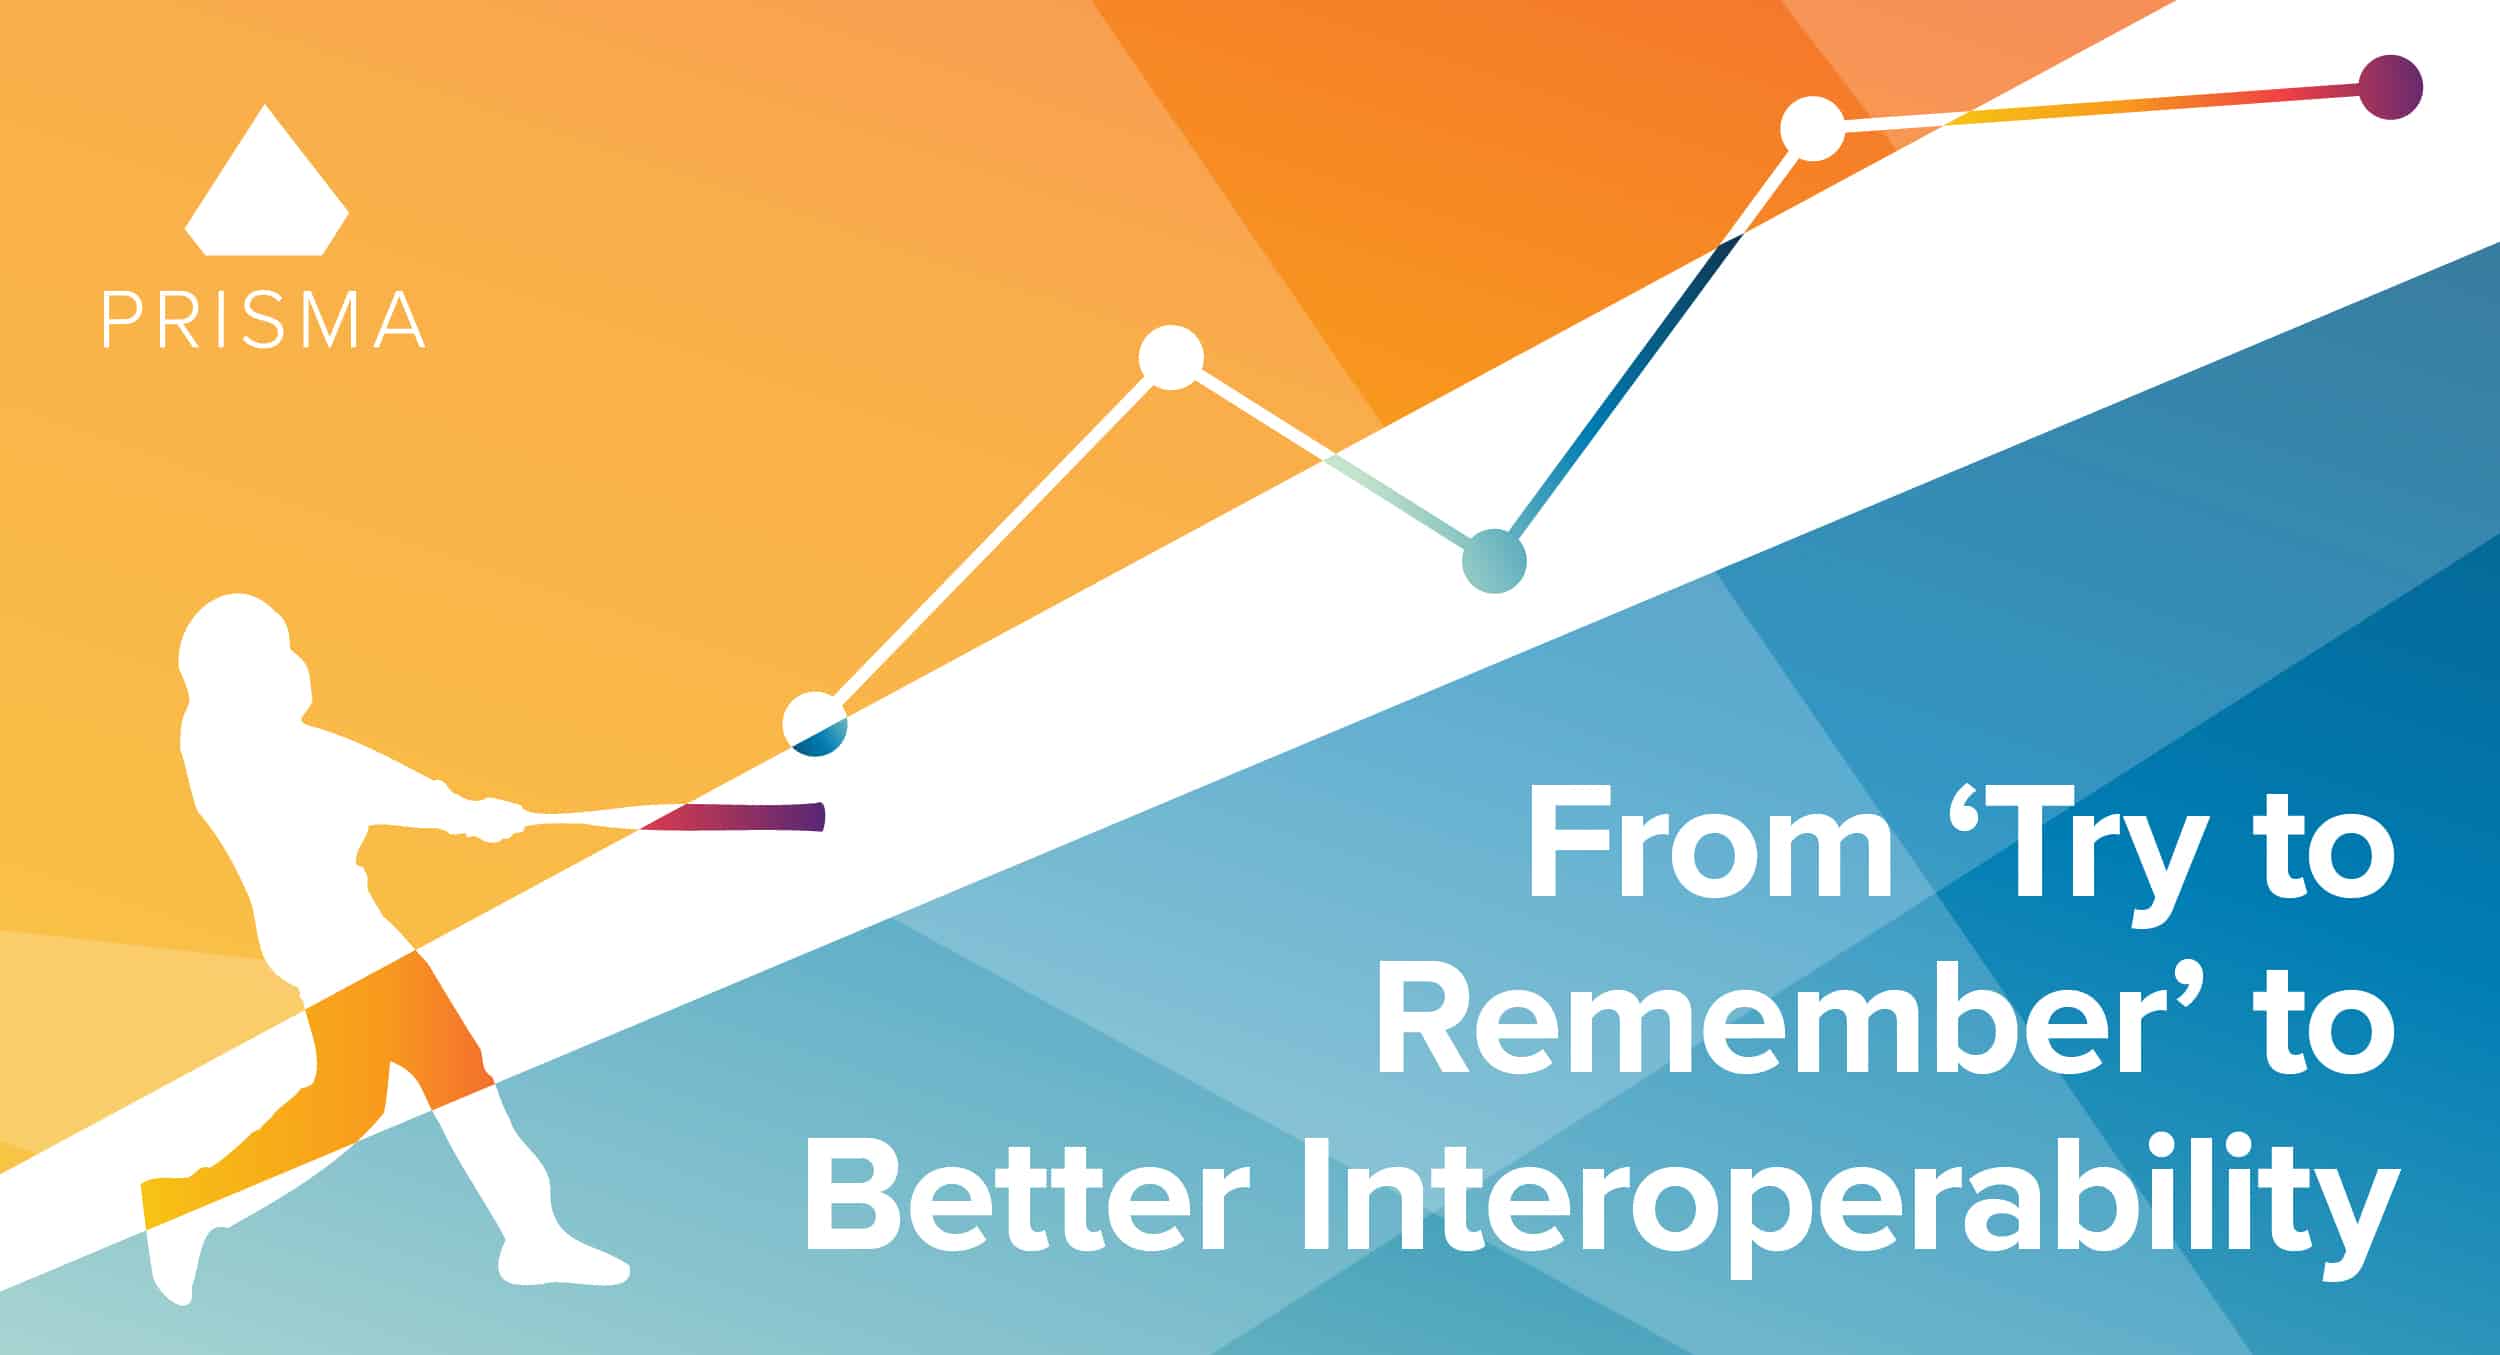 prisma-from-try-to-remember-to-better-interoperability-blog-headerline